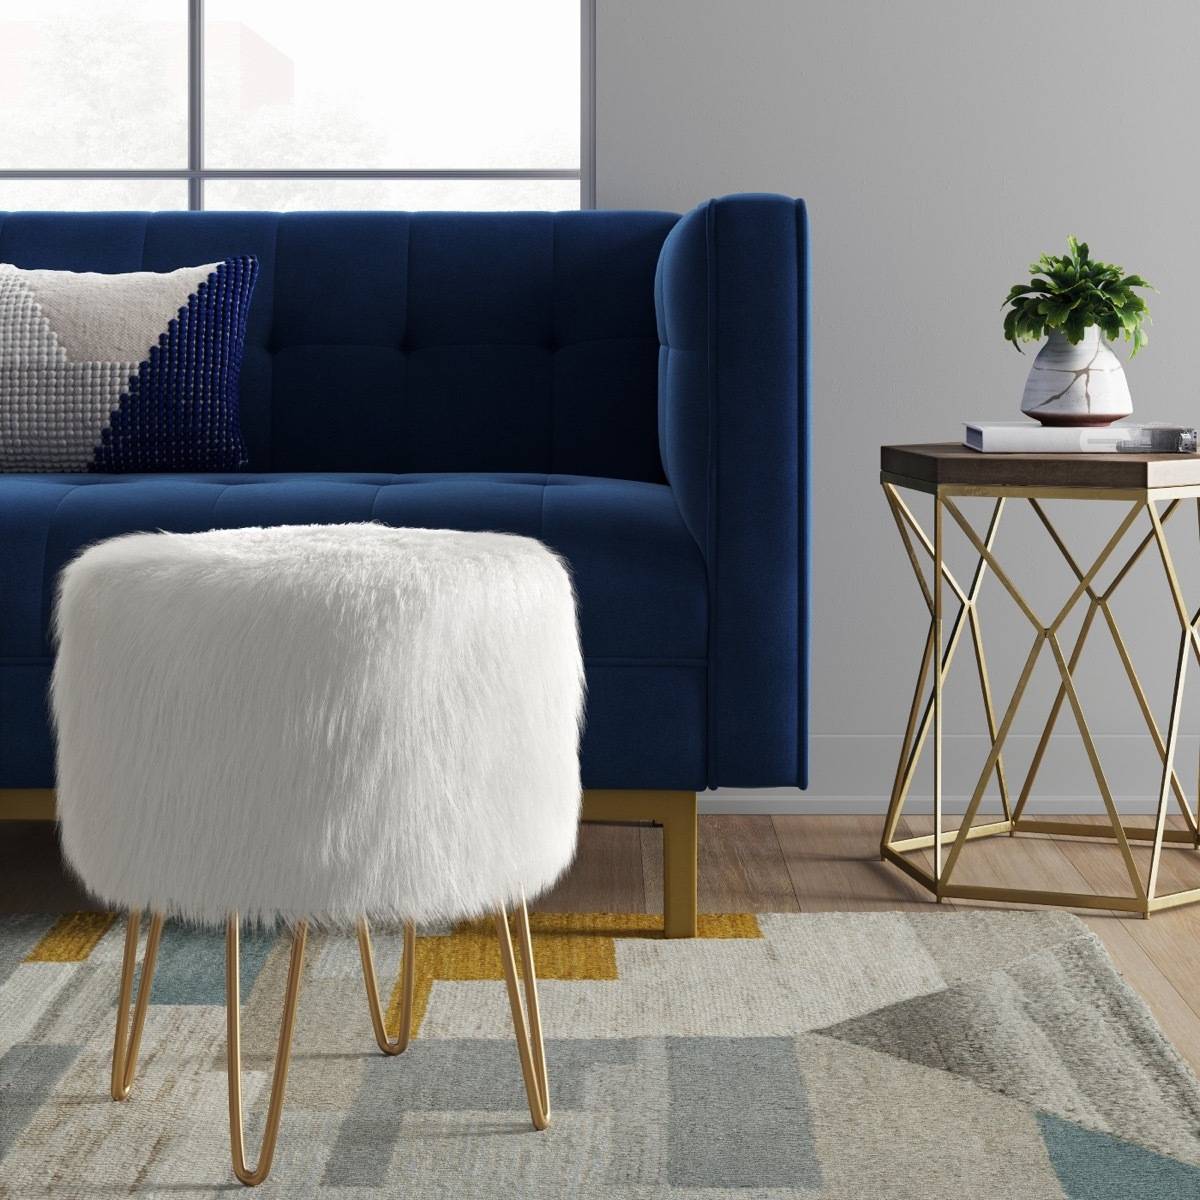 Radovre hairpin ottoman from Target